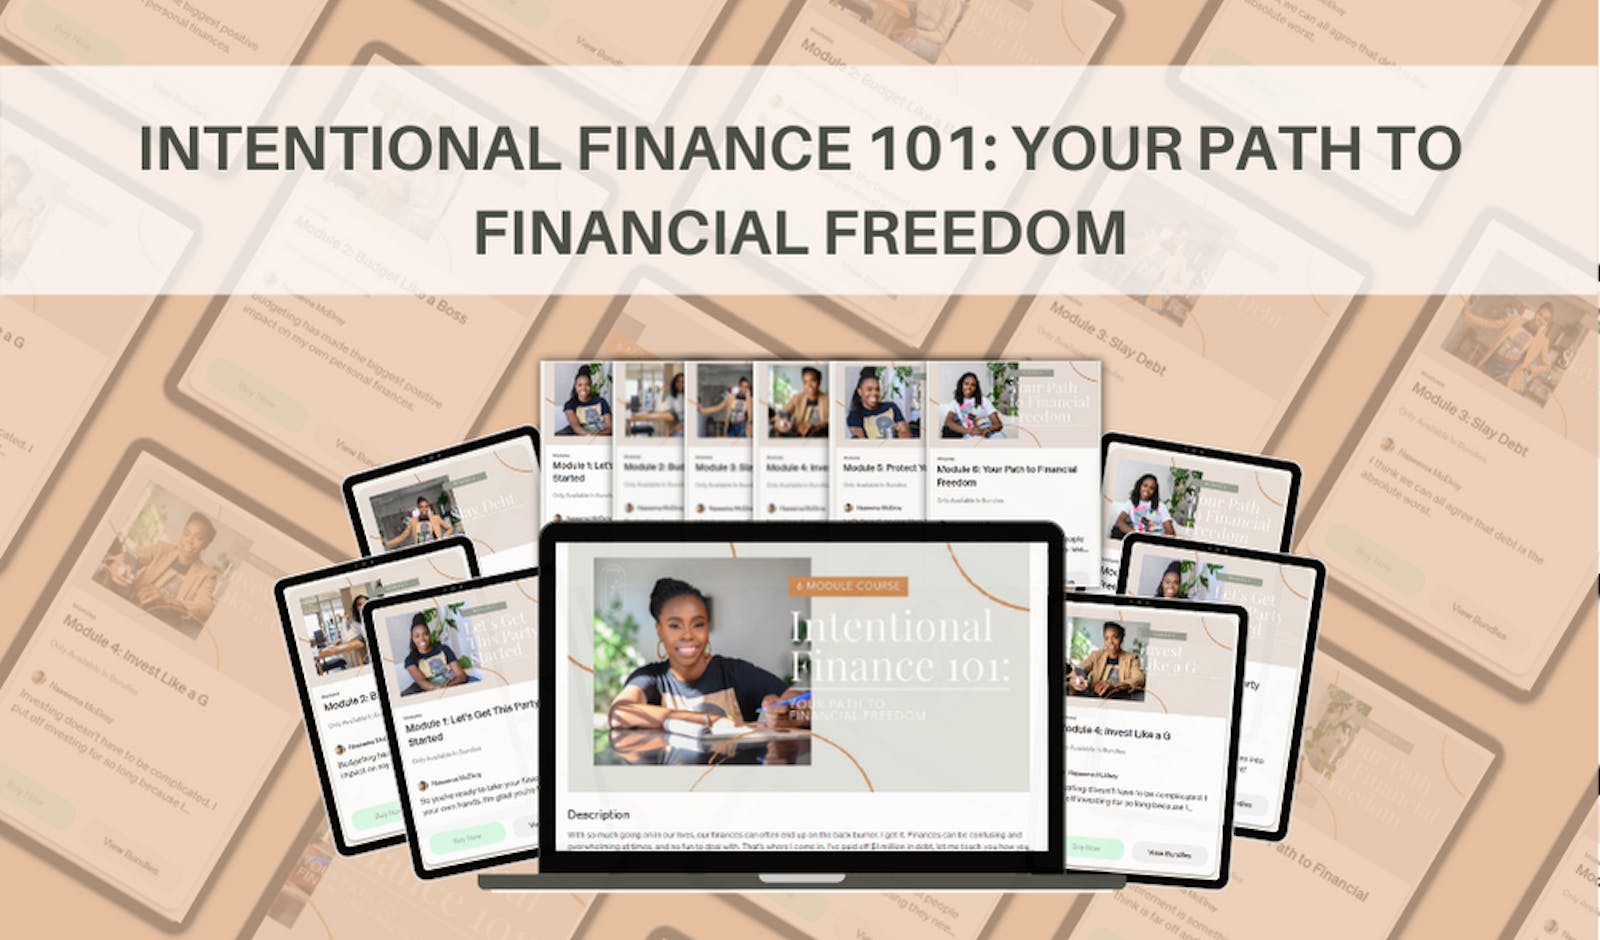 Intentional Finance 101: Your Path to Financial Freedom